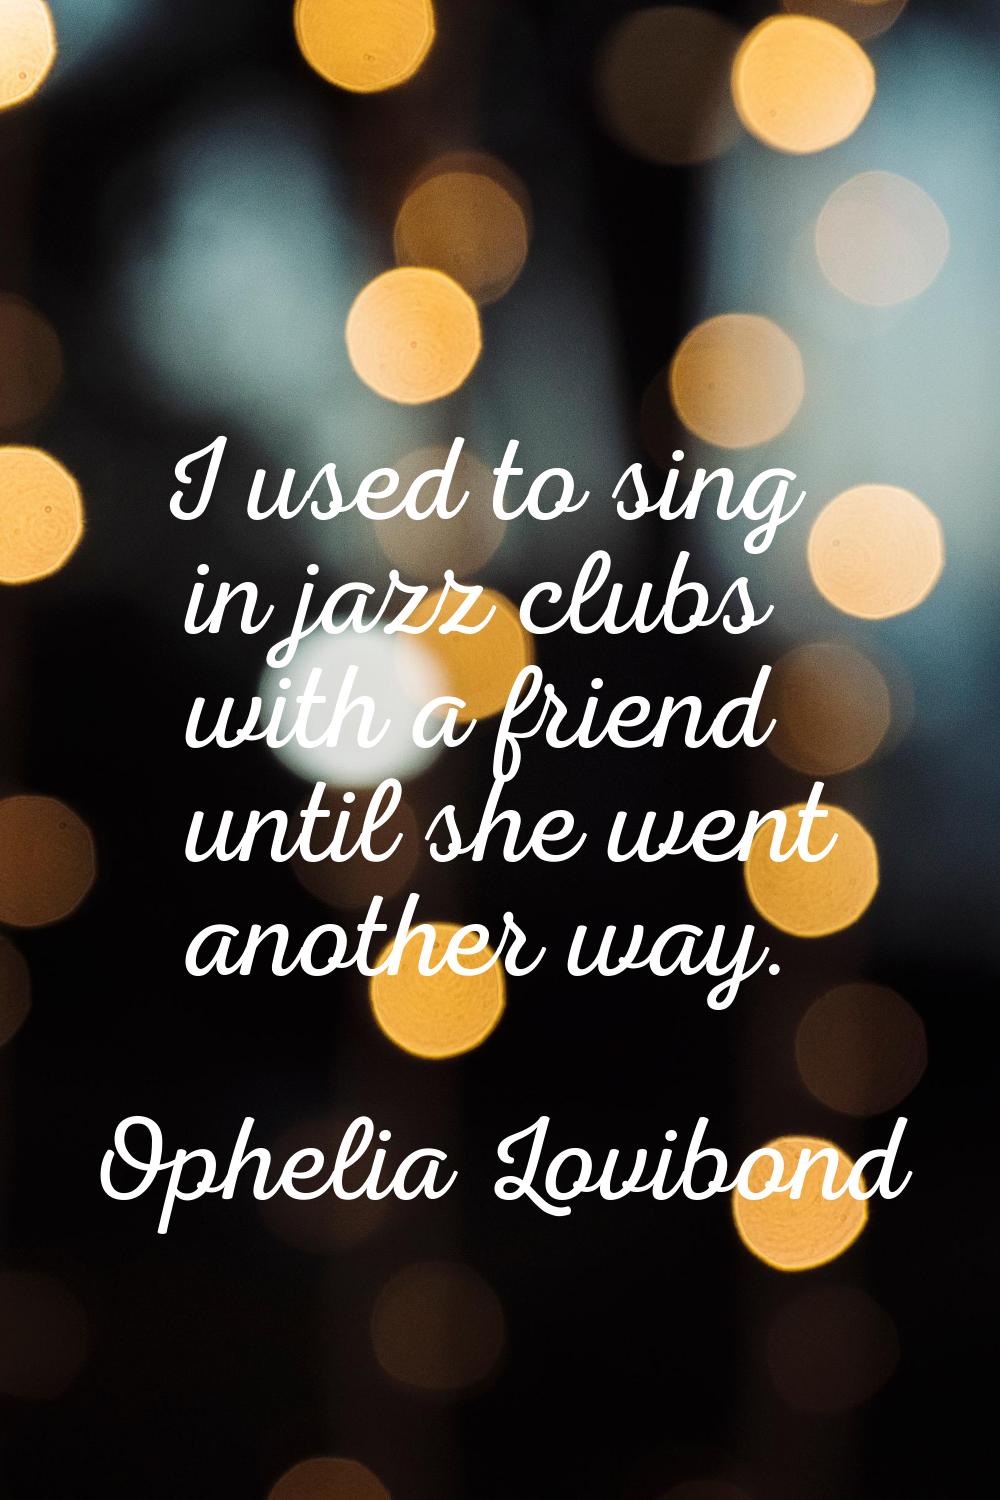 I used to sing in jazz clubs with a friend until she went another way.